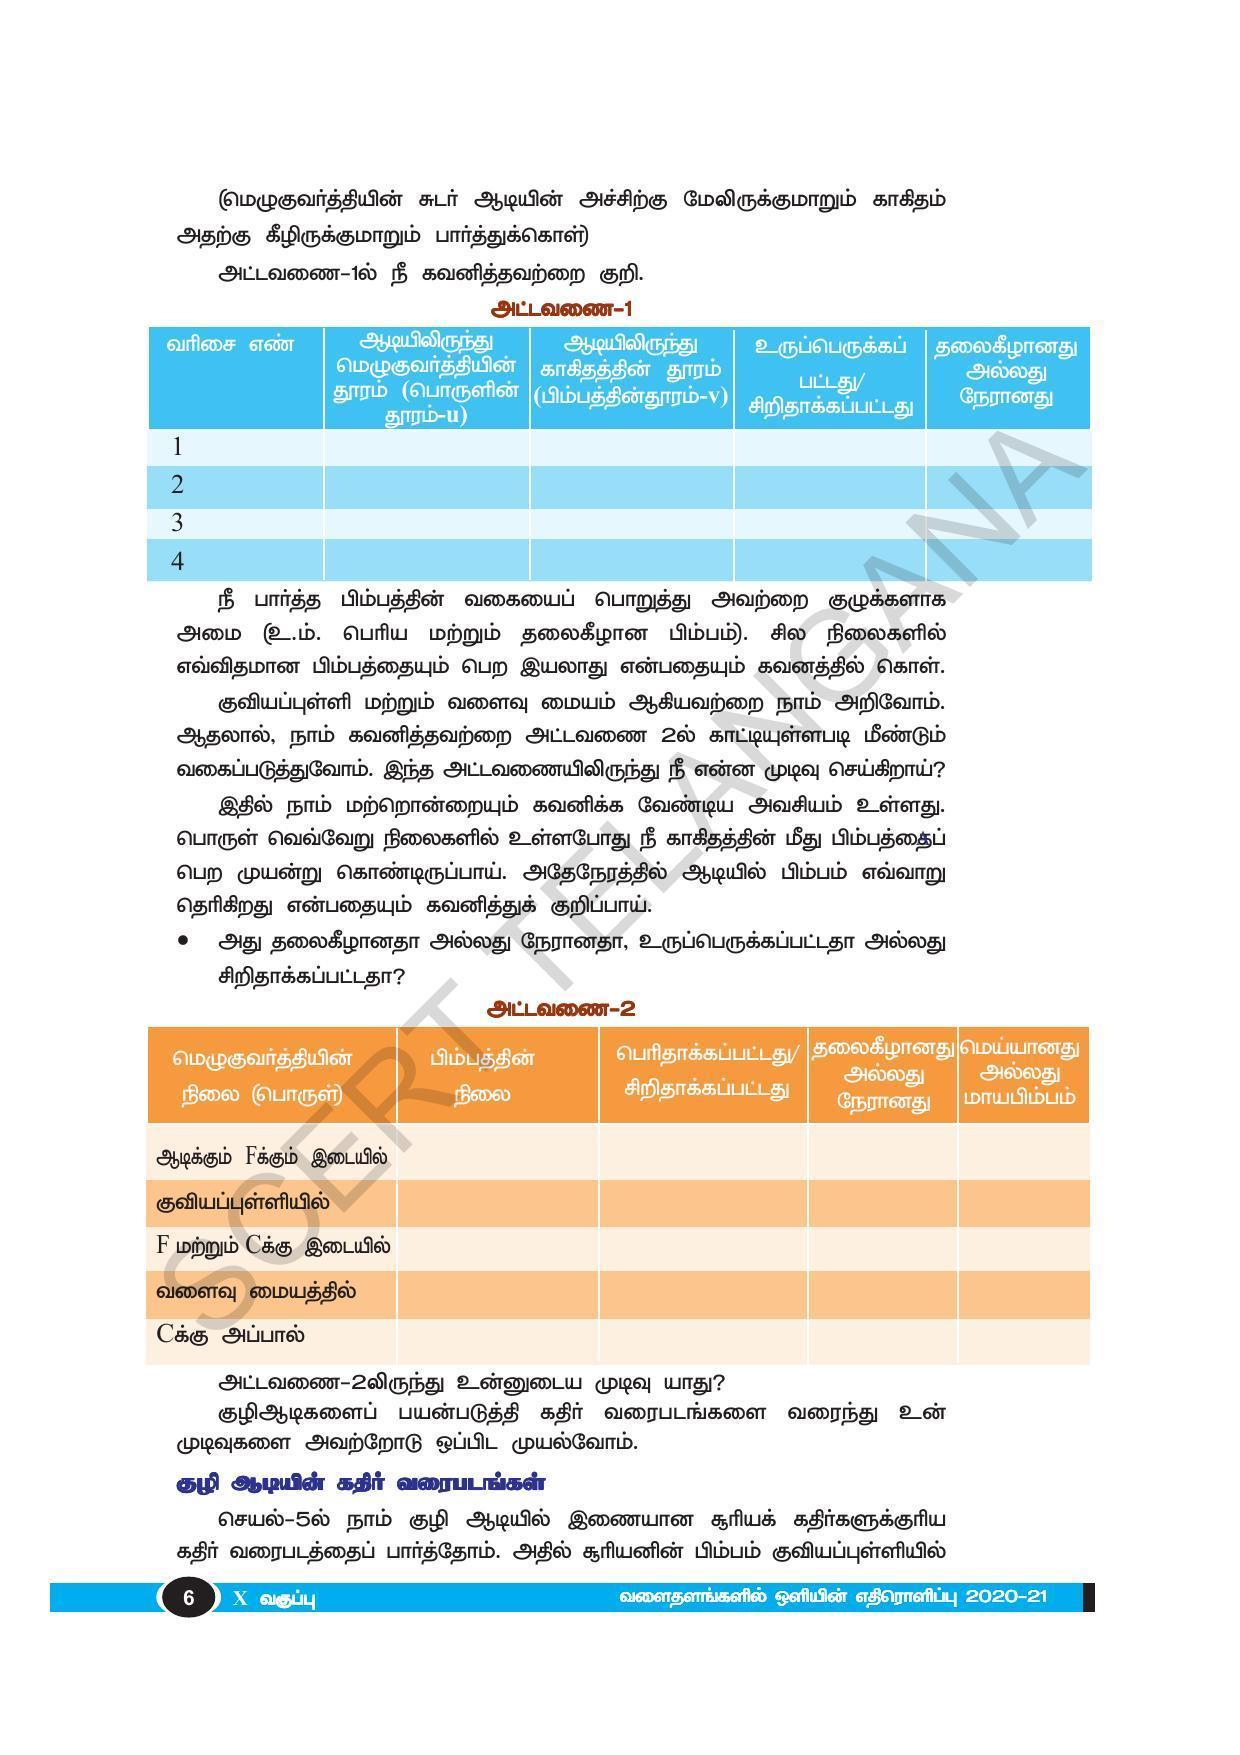 TS SCERT Class 10 Physical Science(Tamil Medium) Text Book - Page 18